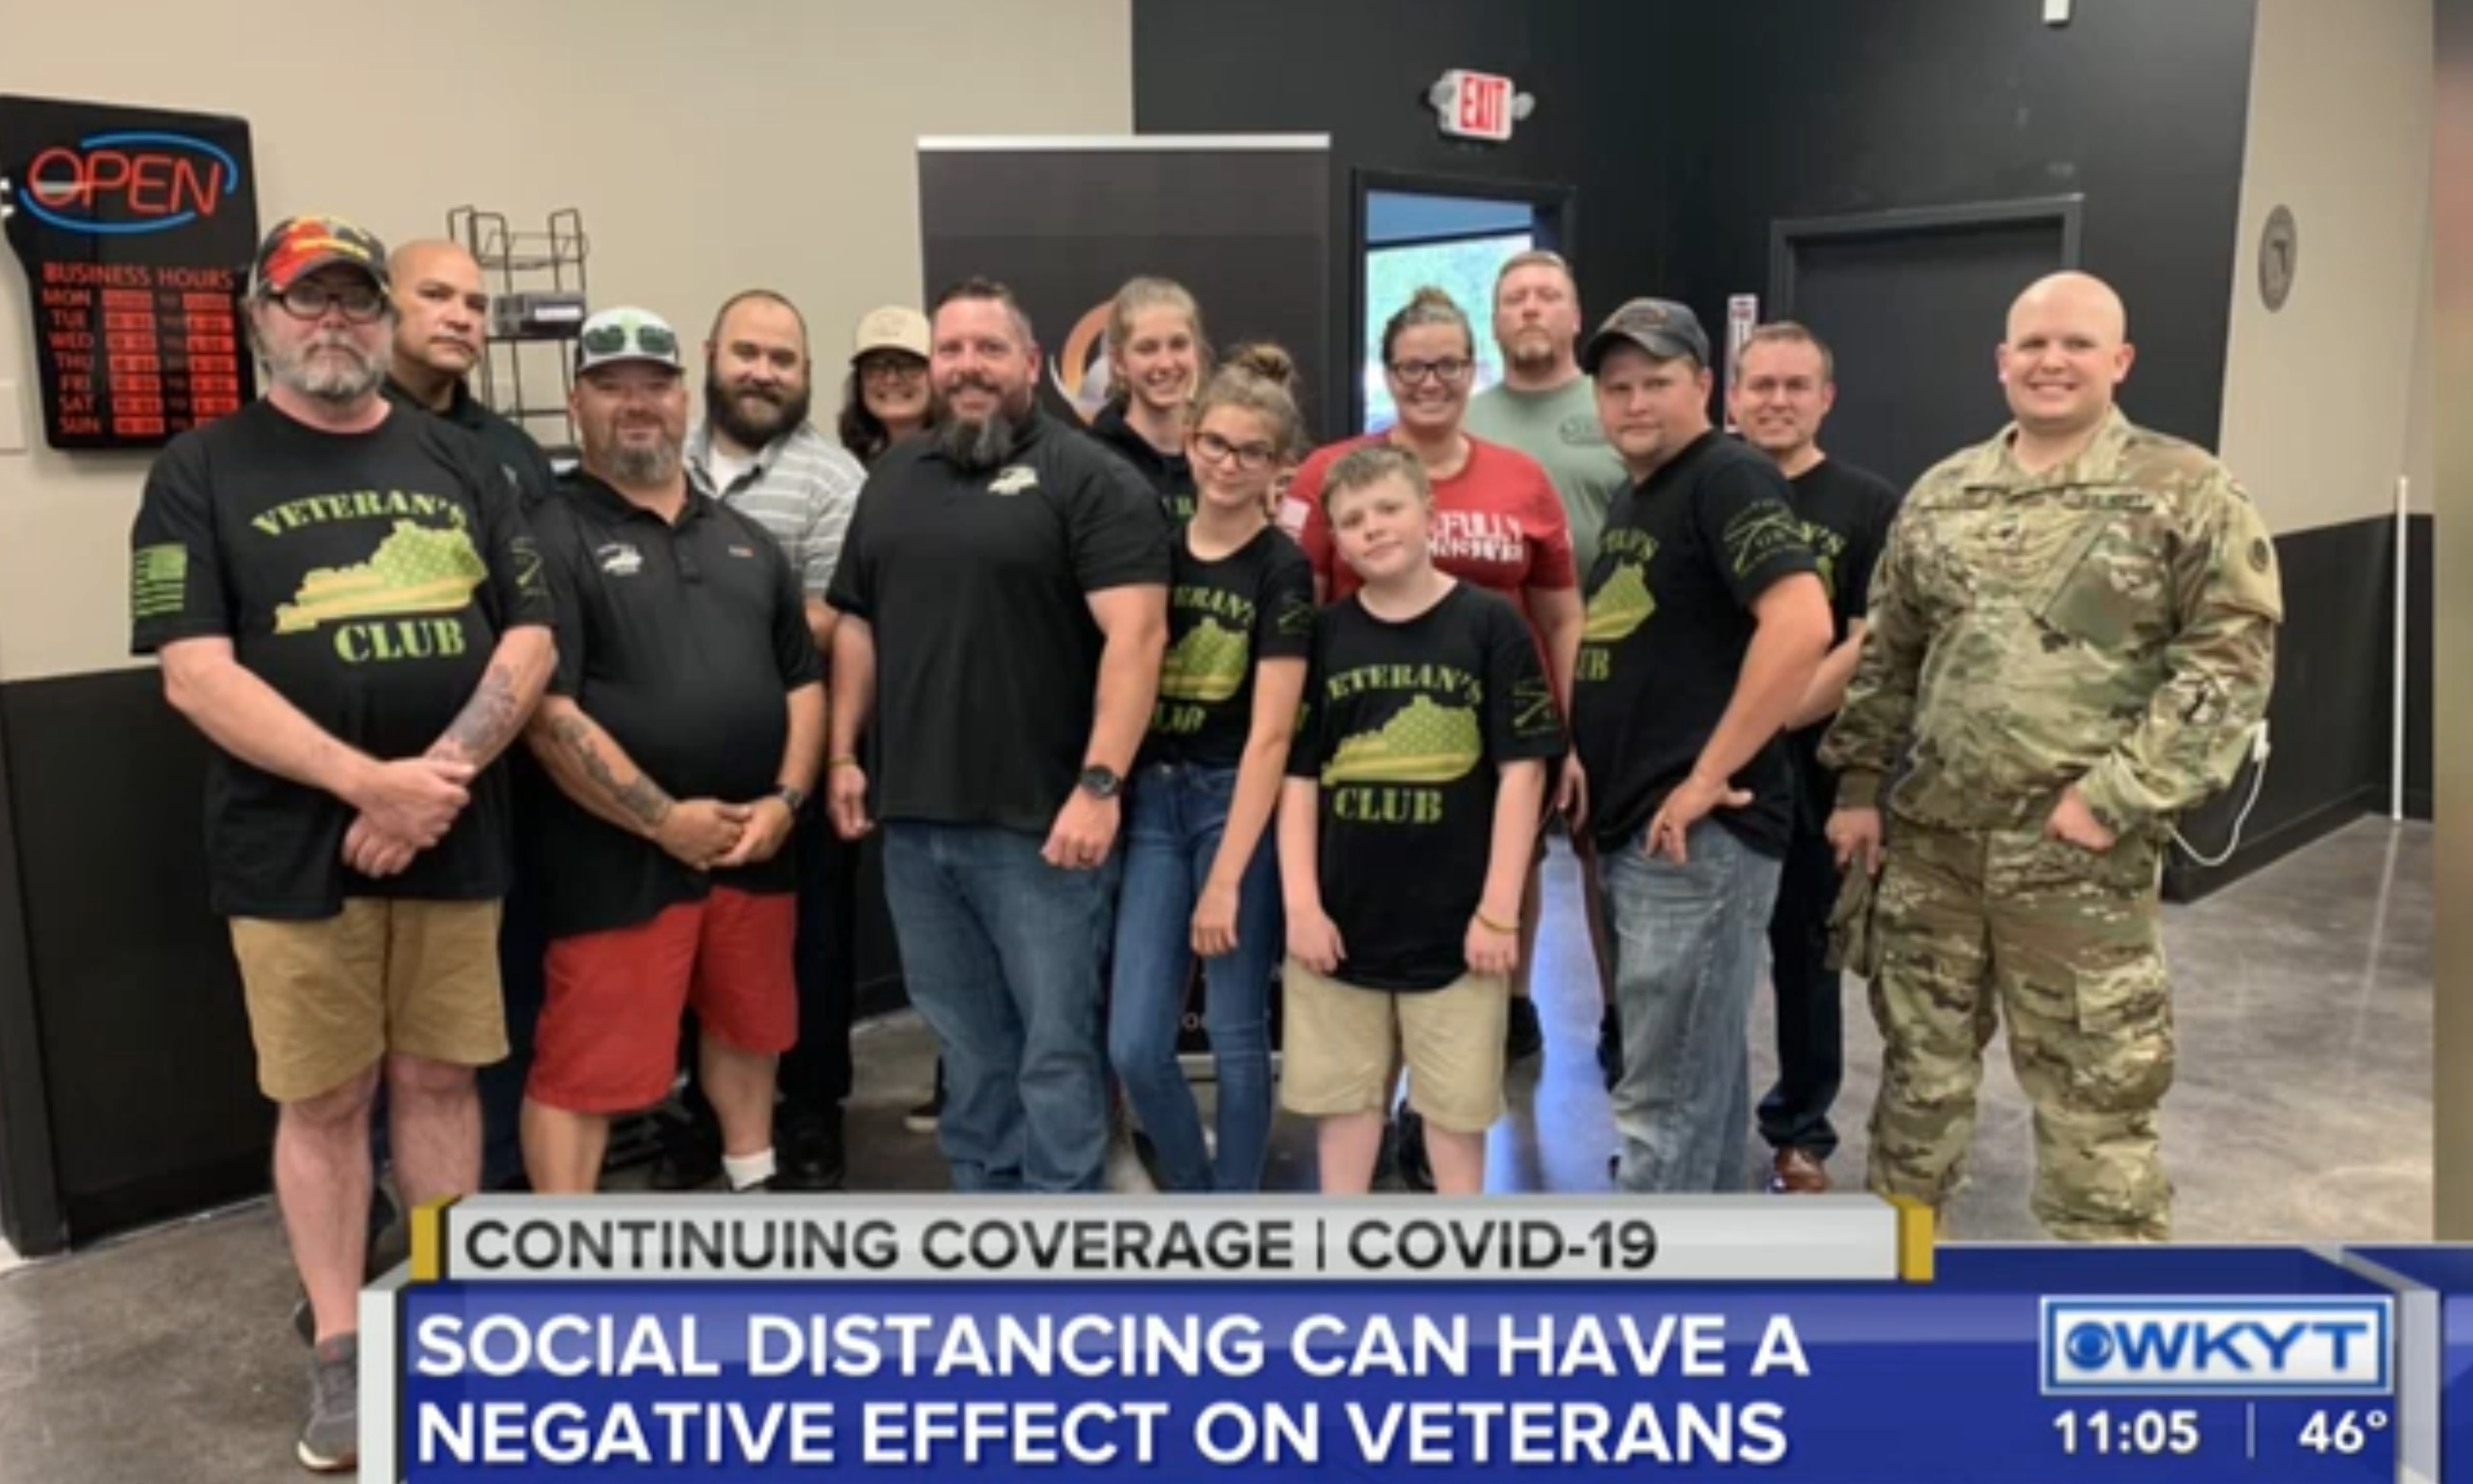 Veteran-founded “Veteran’s Club” encourages virtual connection in a time of social isolation